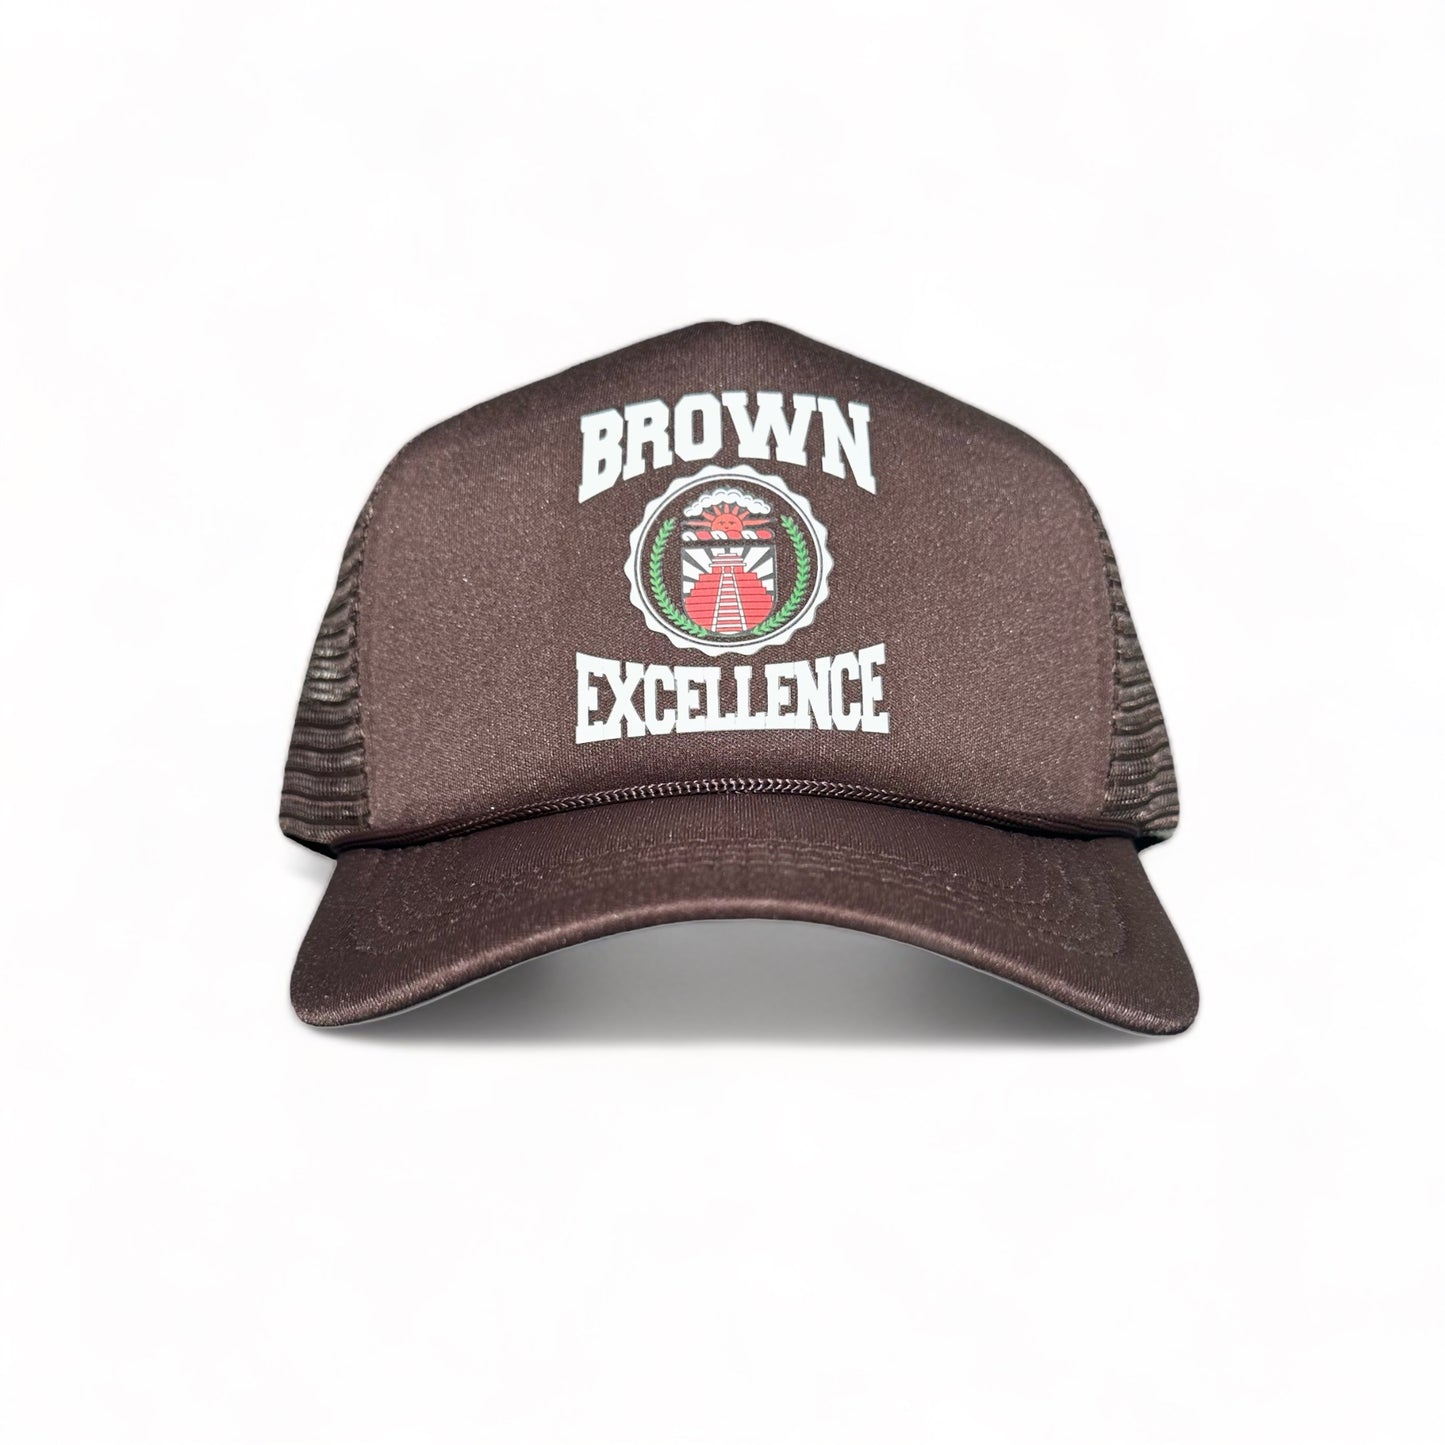 BROWN EXCELLENCE TRUCKER - BROWN